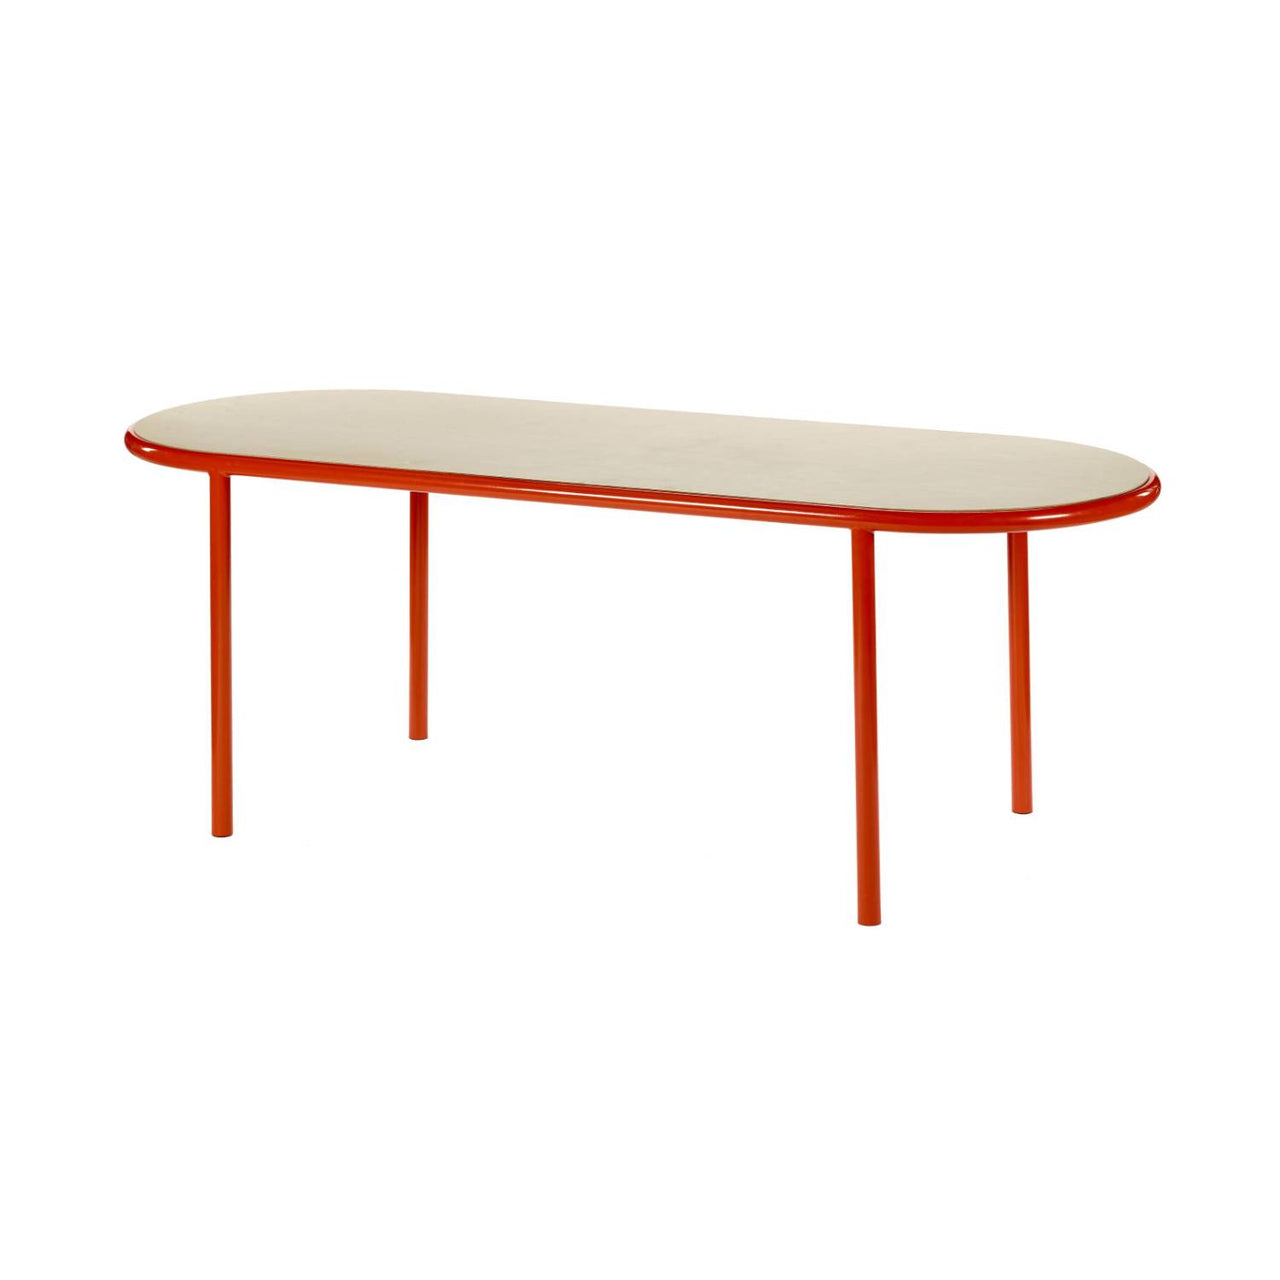 Wooden Table: Oval + Birch + Red